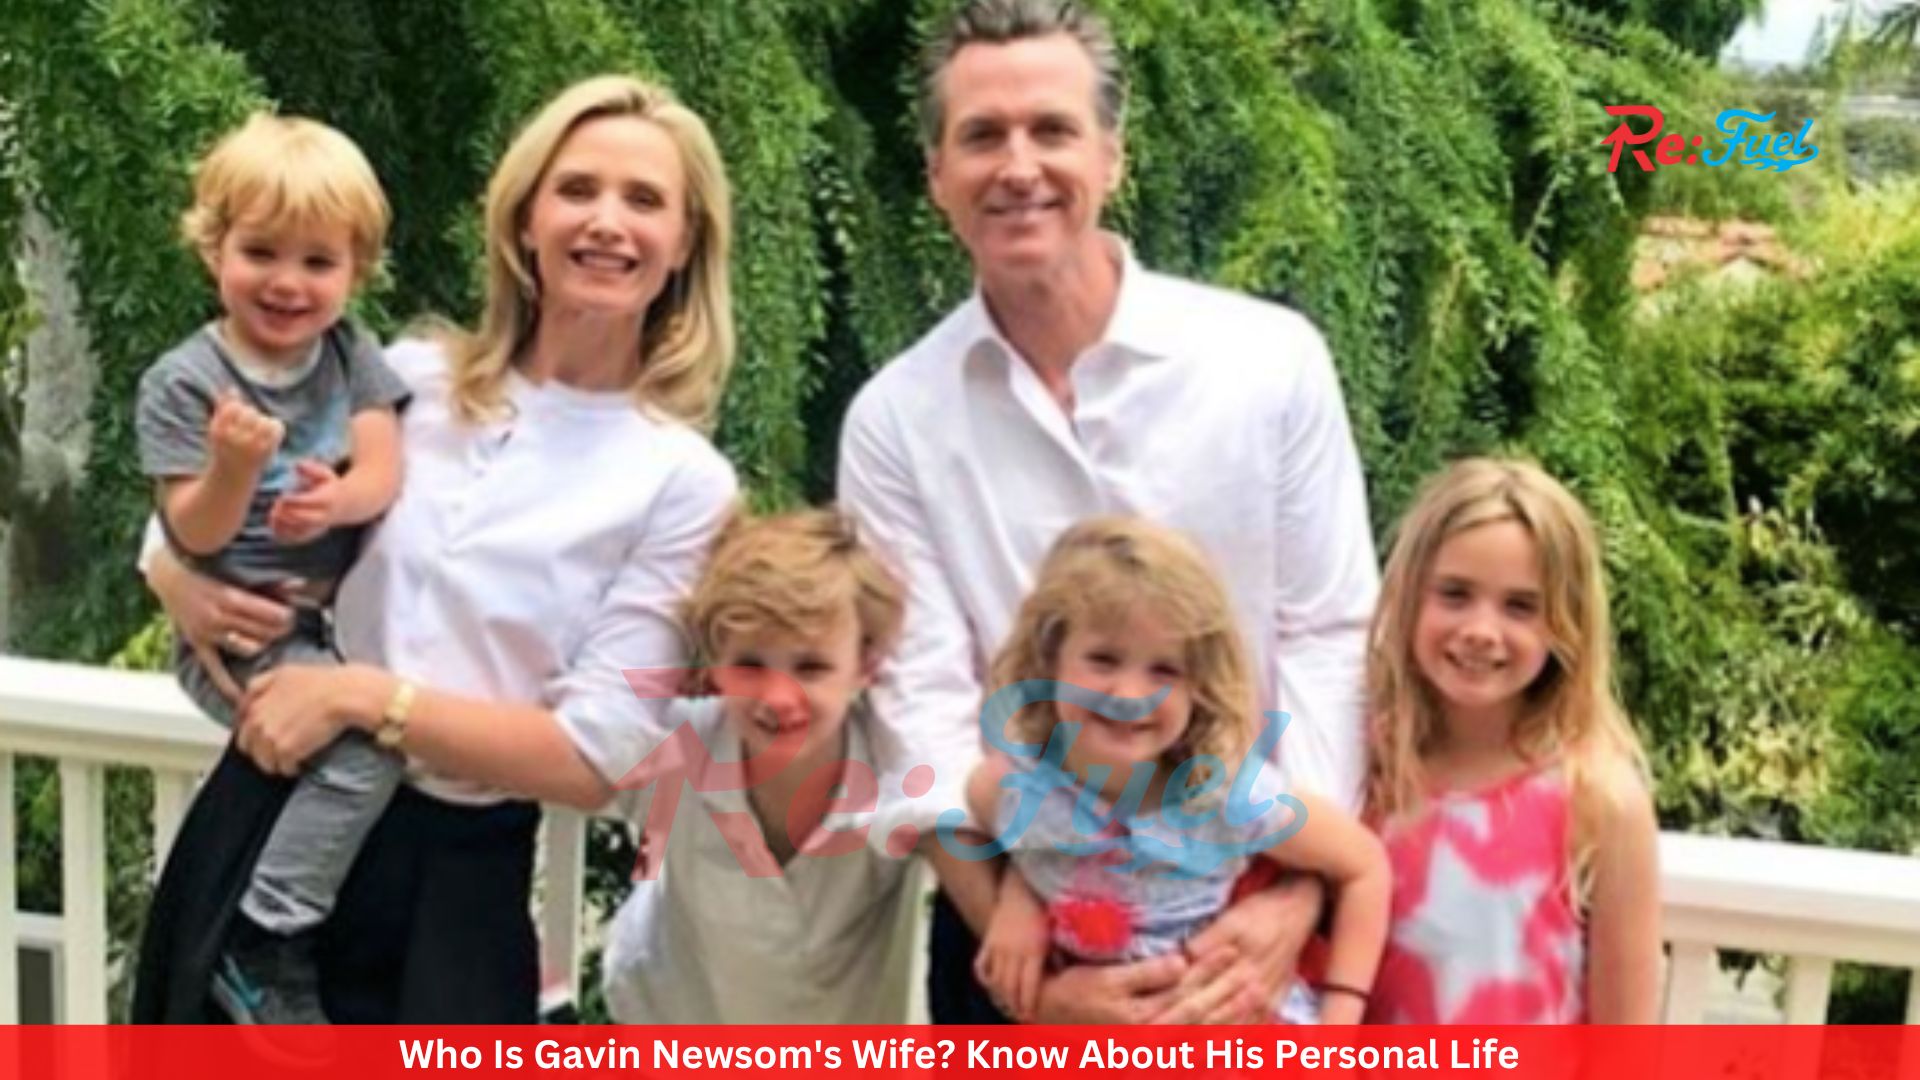 Who Is Gavin Newsom's Wife? Know About His Personal Life